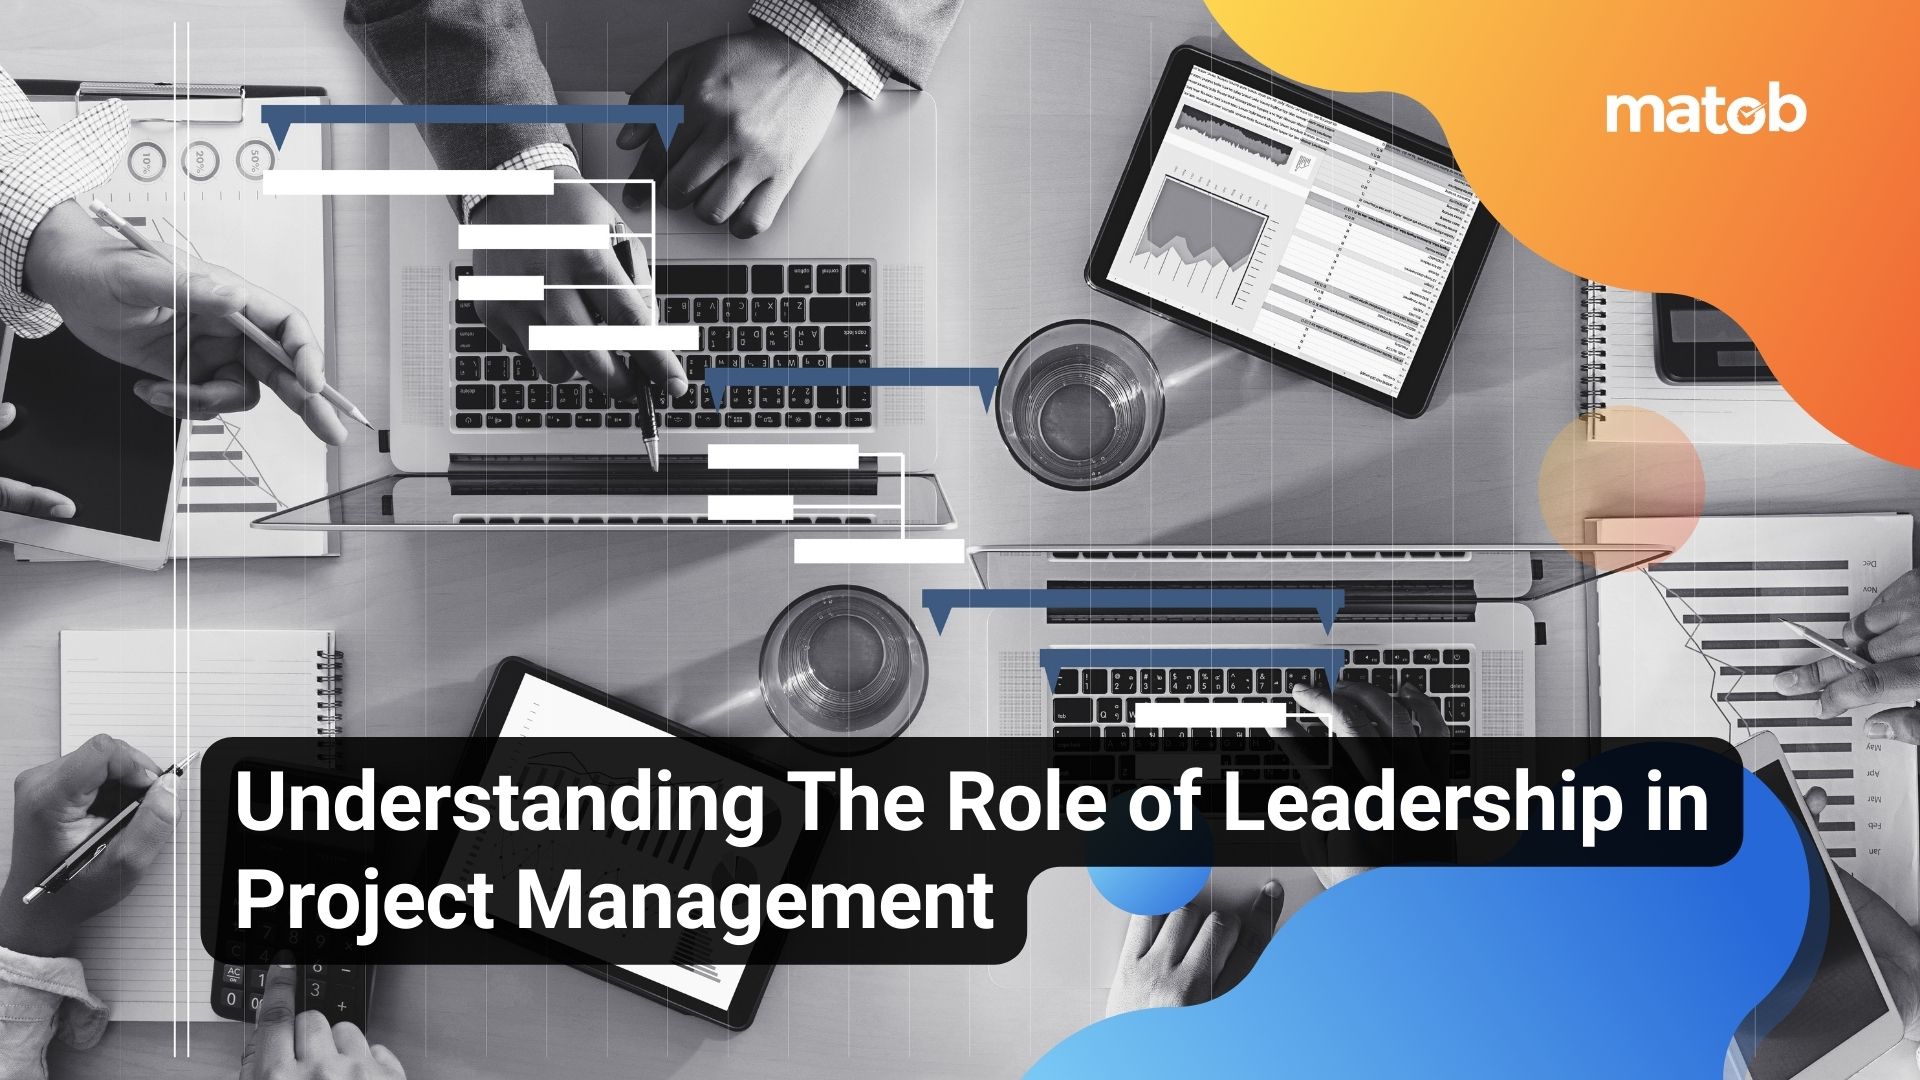 Understanding The Role of Leadership in Project Management